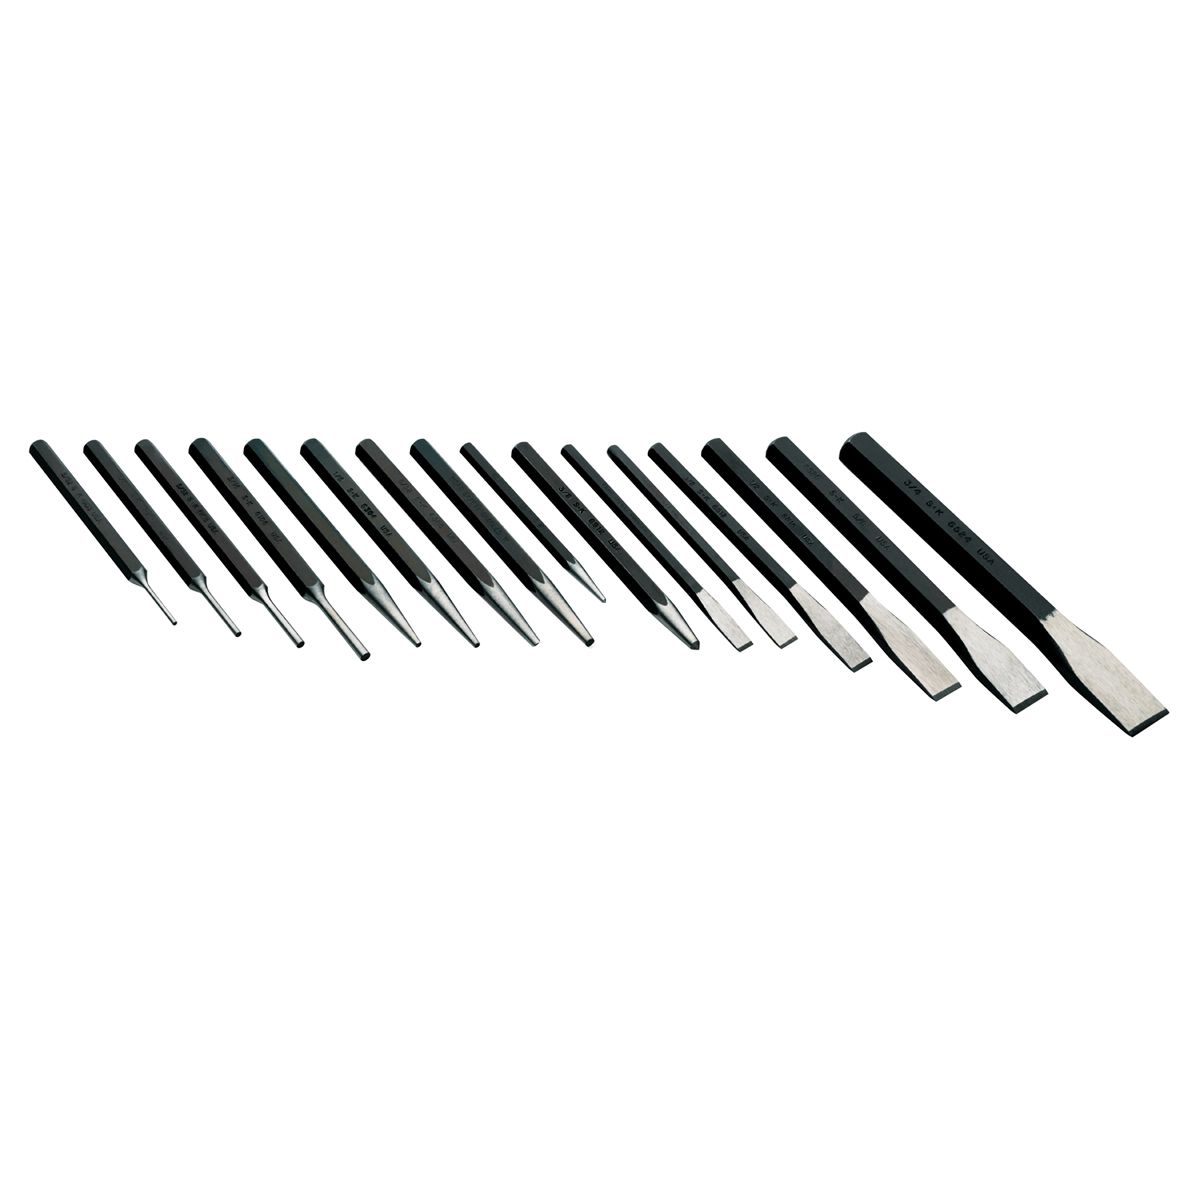 Punch and Chisel Set - 16-Pc